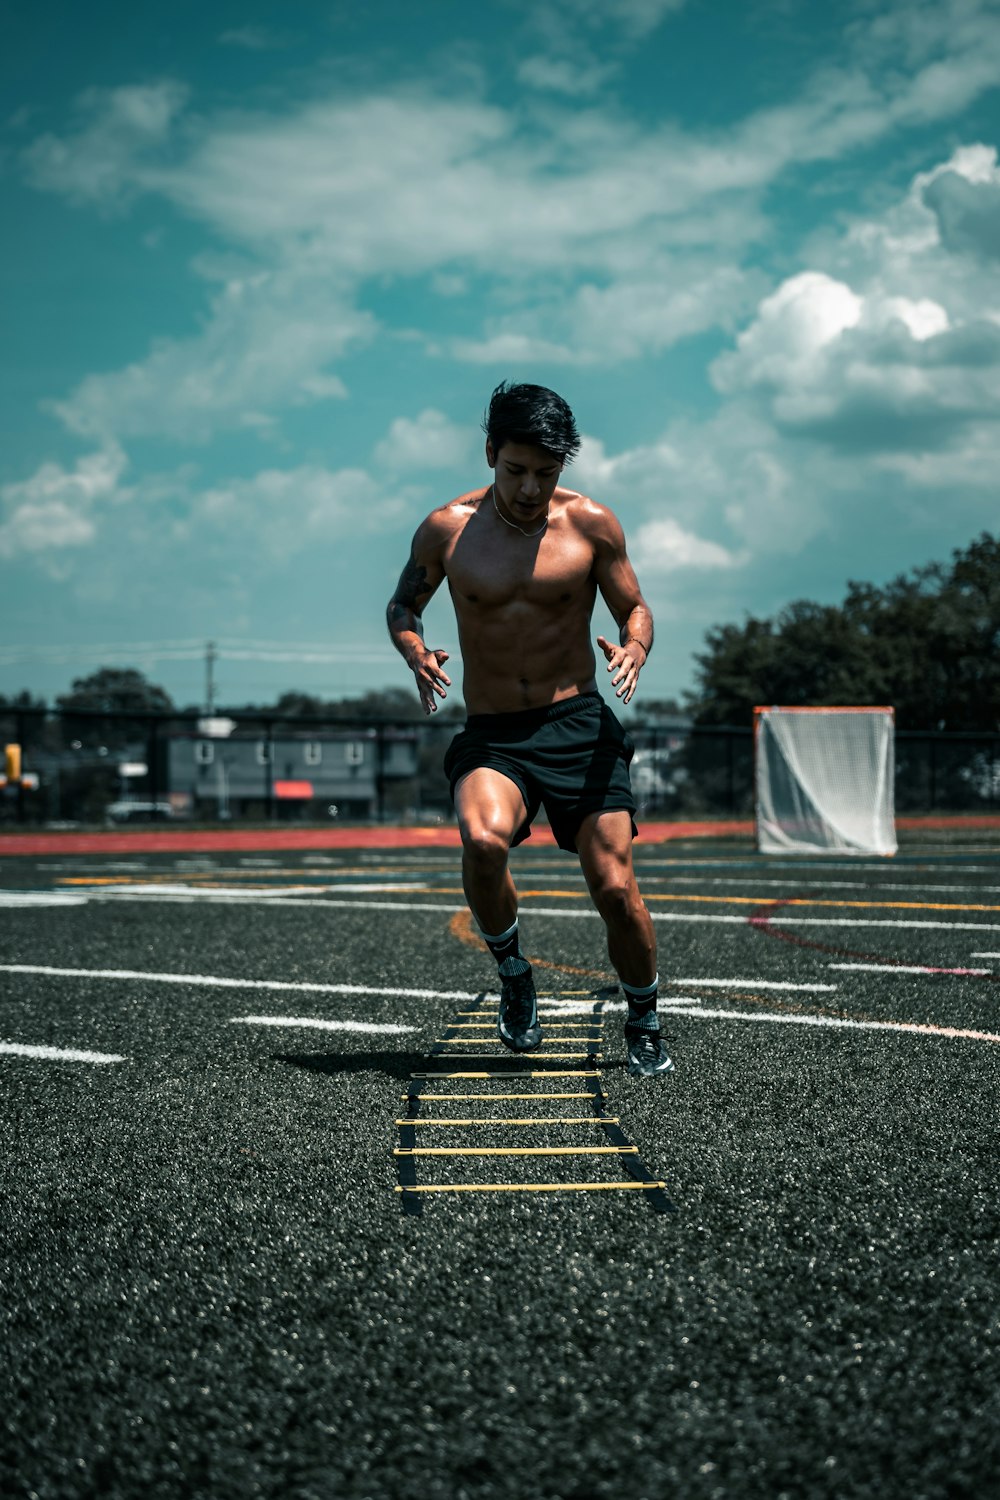 man in black shorts running on track field during daytime